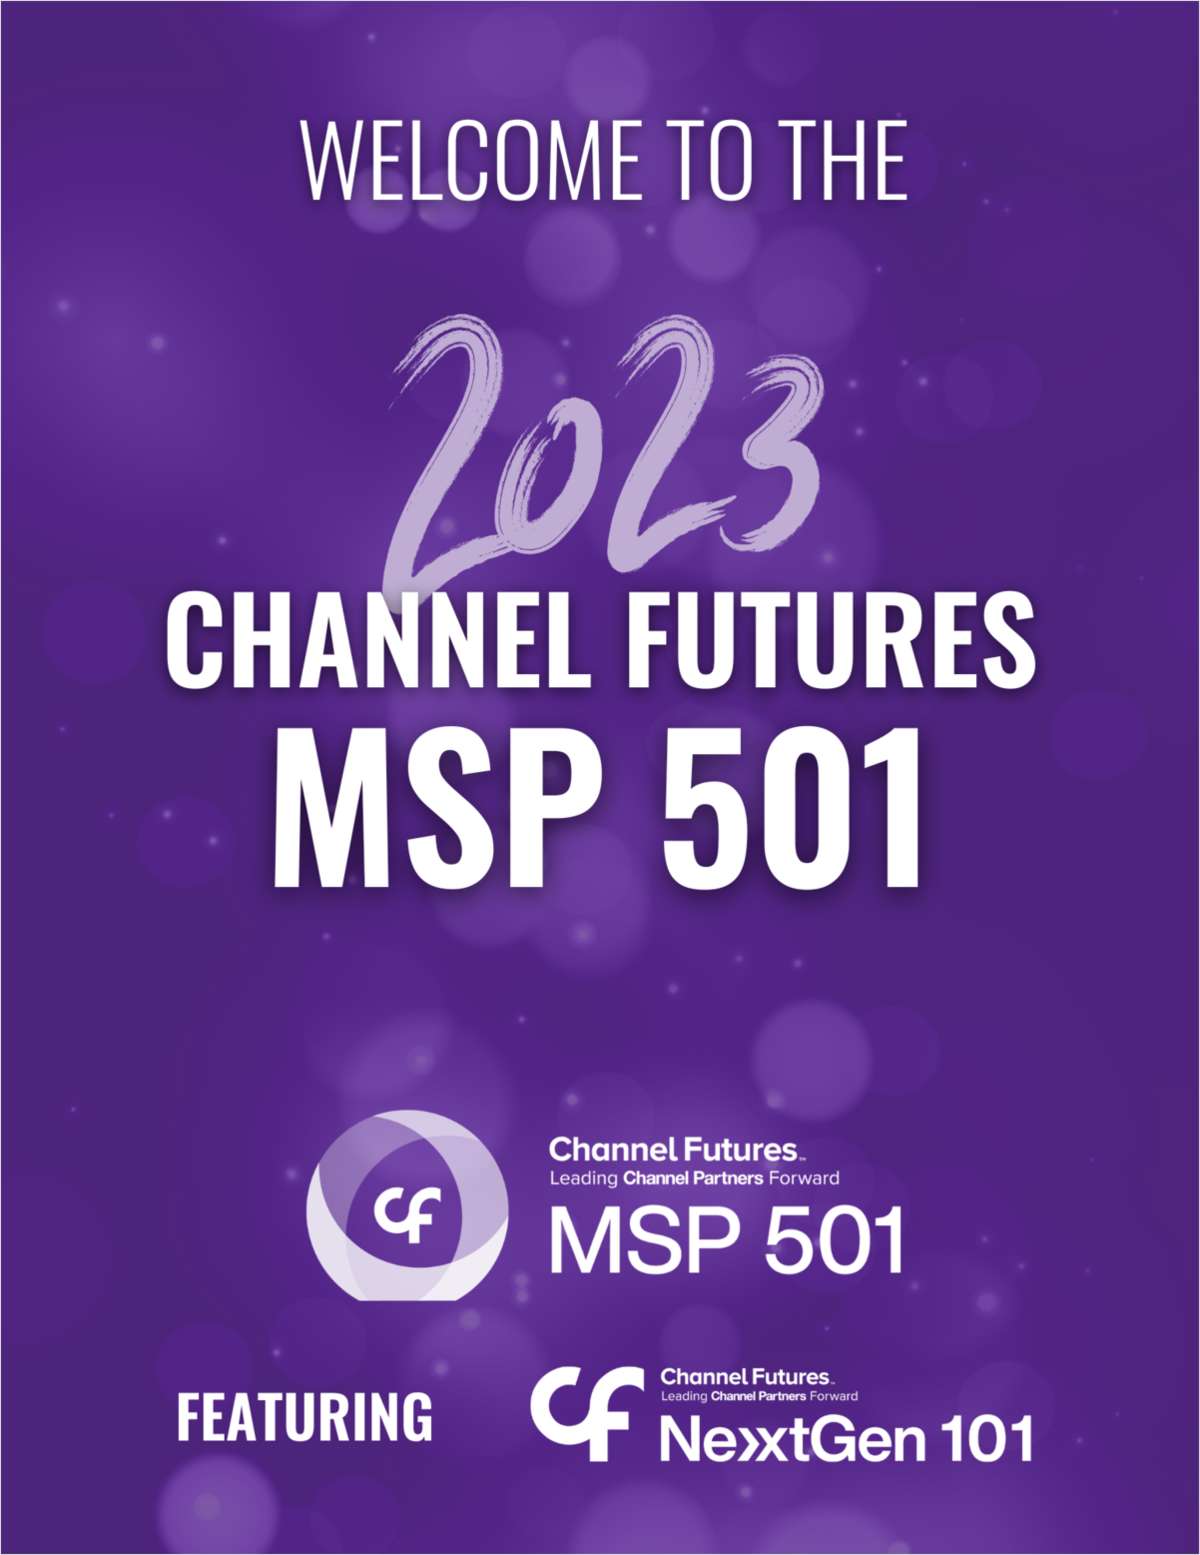 2023 Channel Futures MSP 501 Application